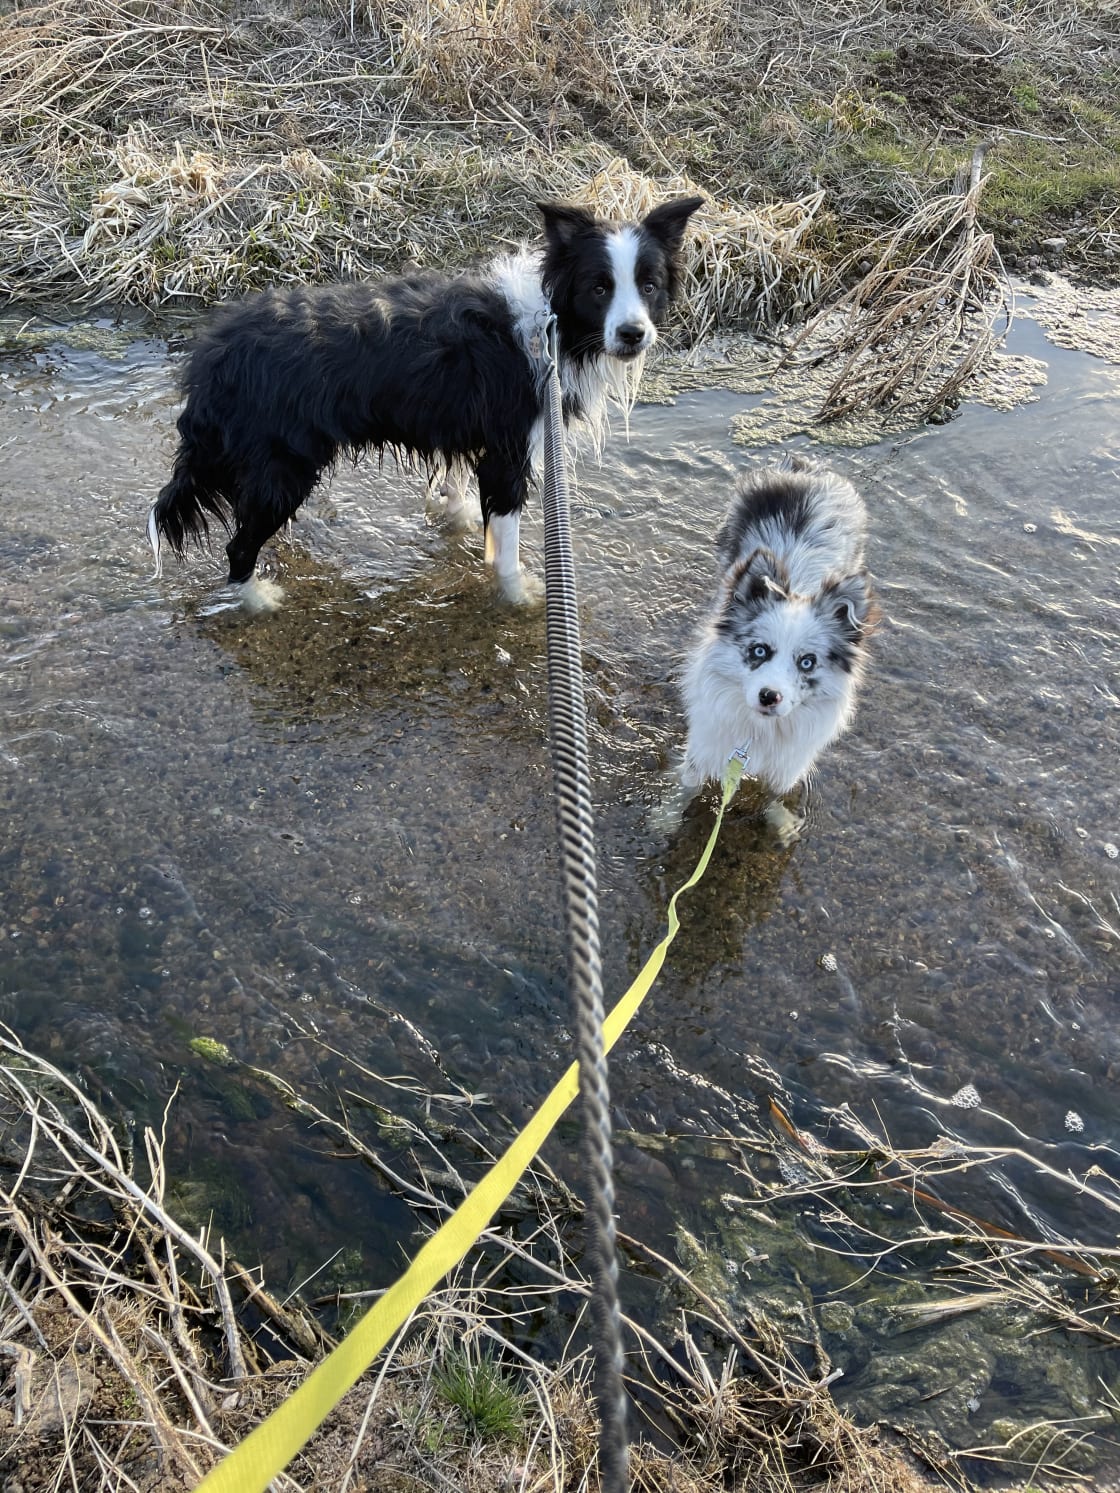 Dogs loved the creek